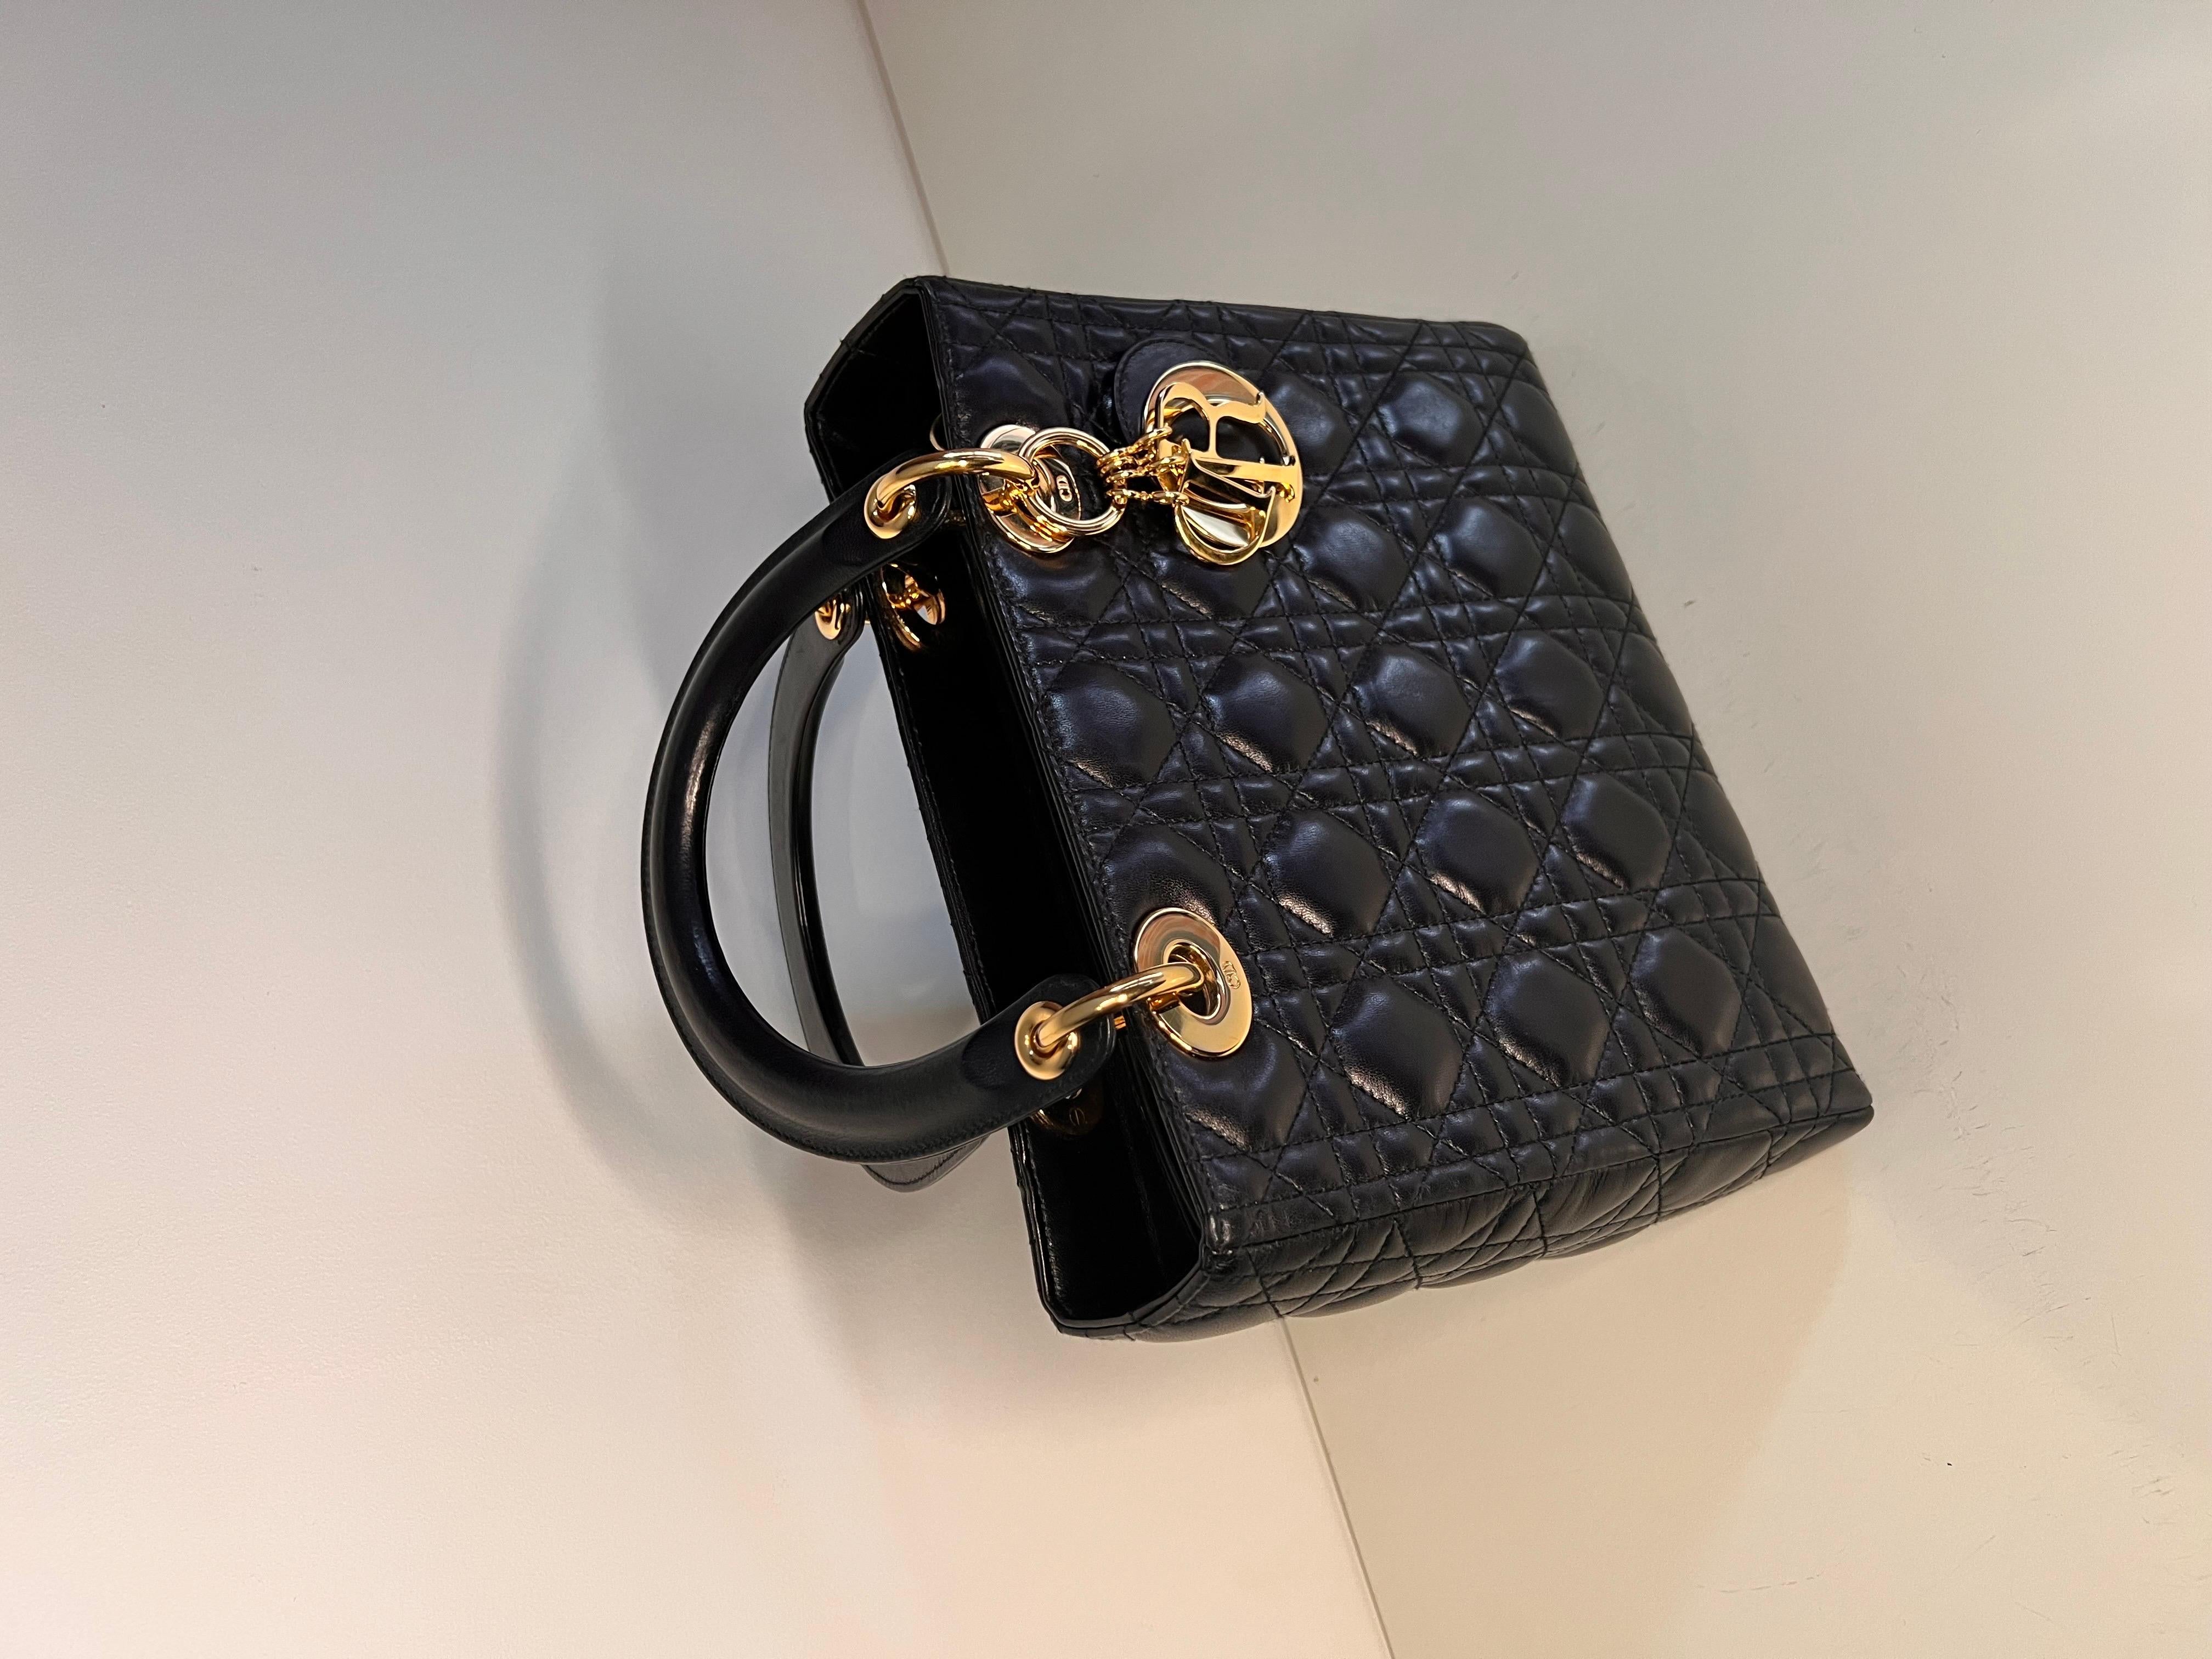 Lady DIOR quilted handbag with gold hardware, famously worn by Princess Diana  6